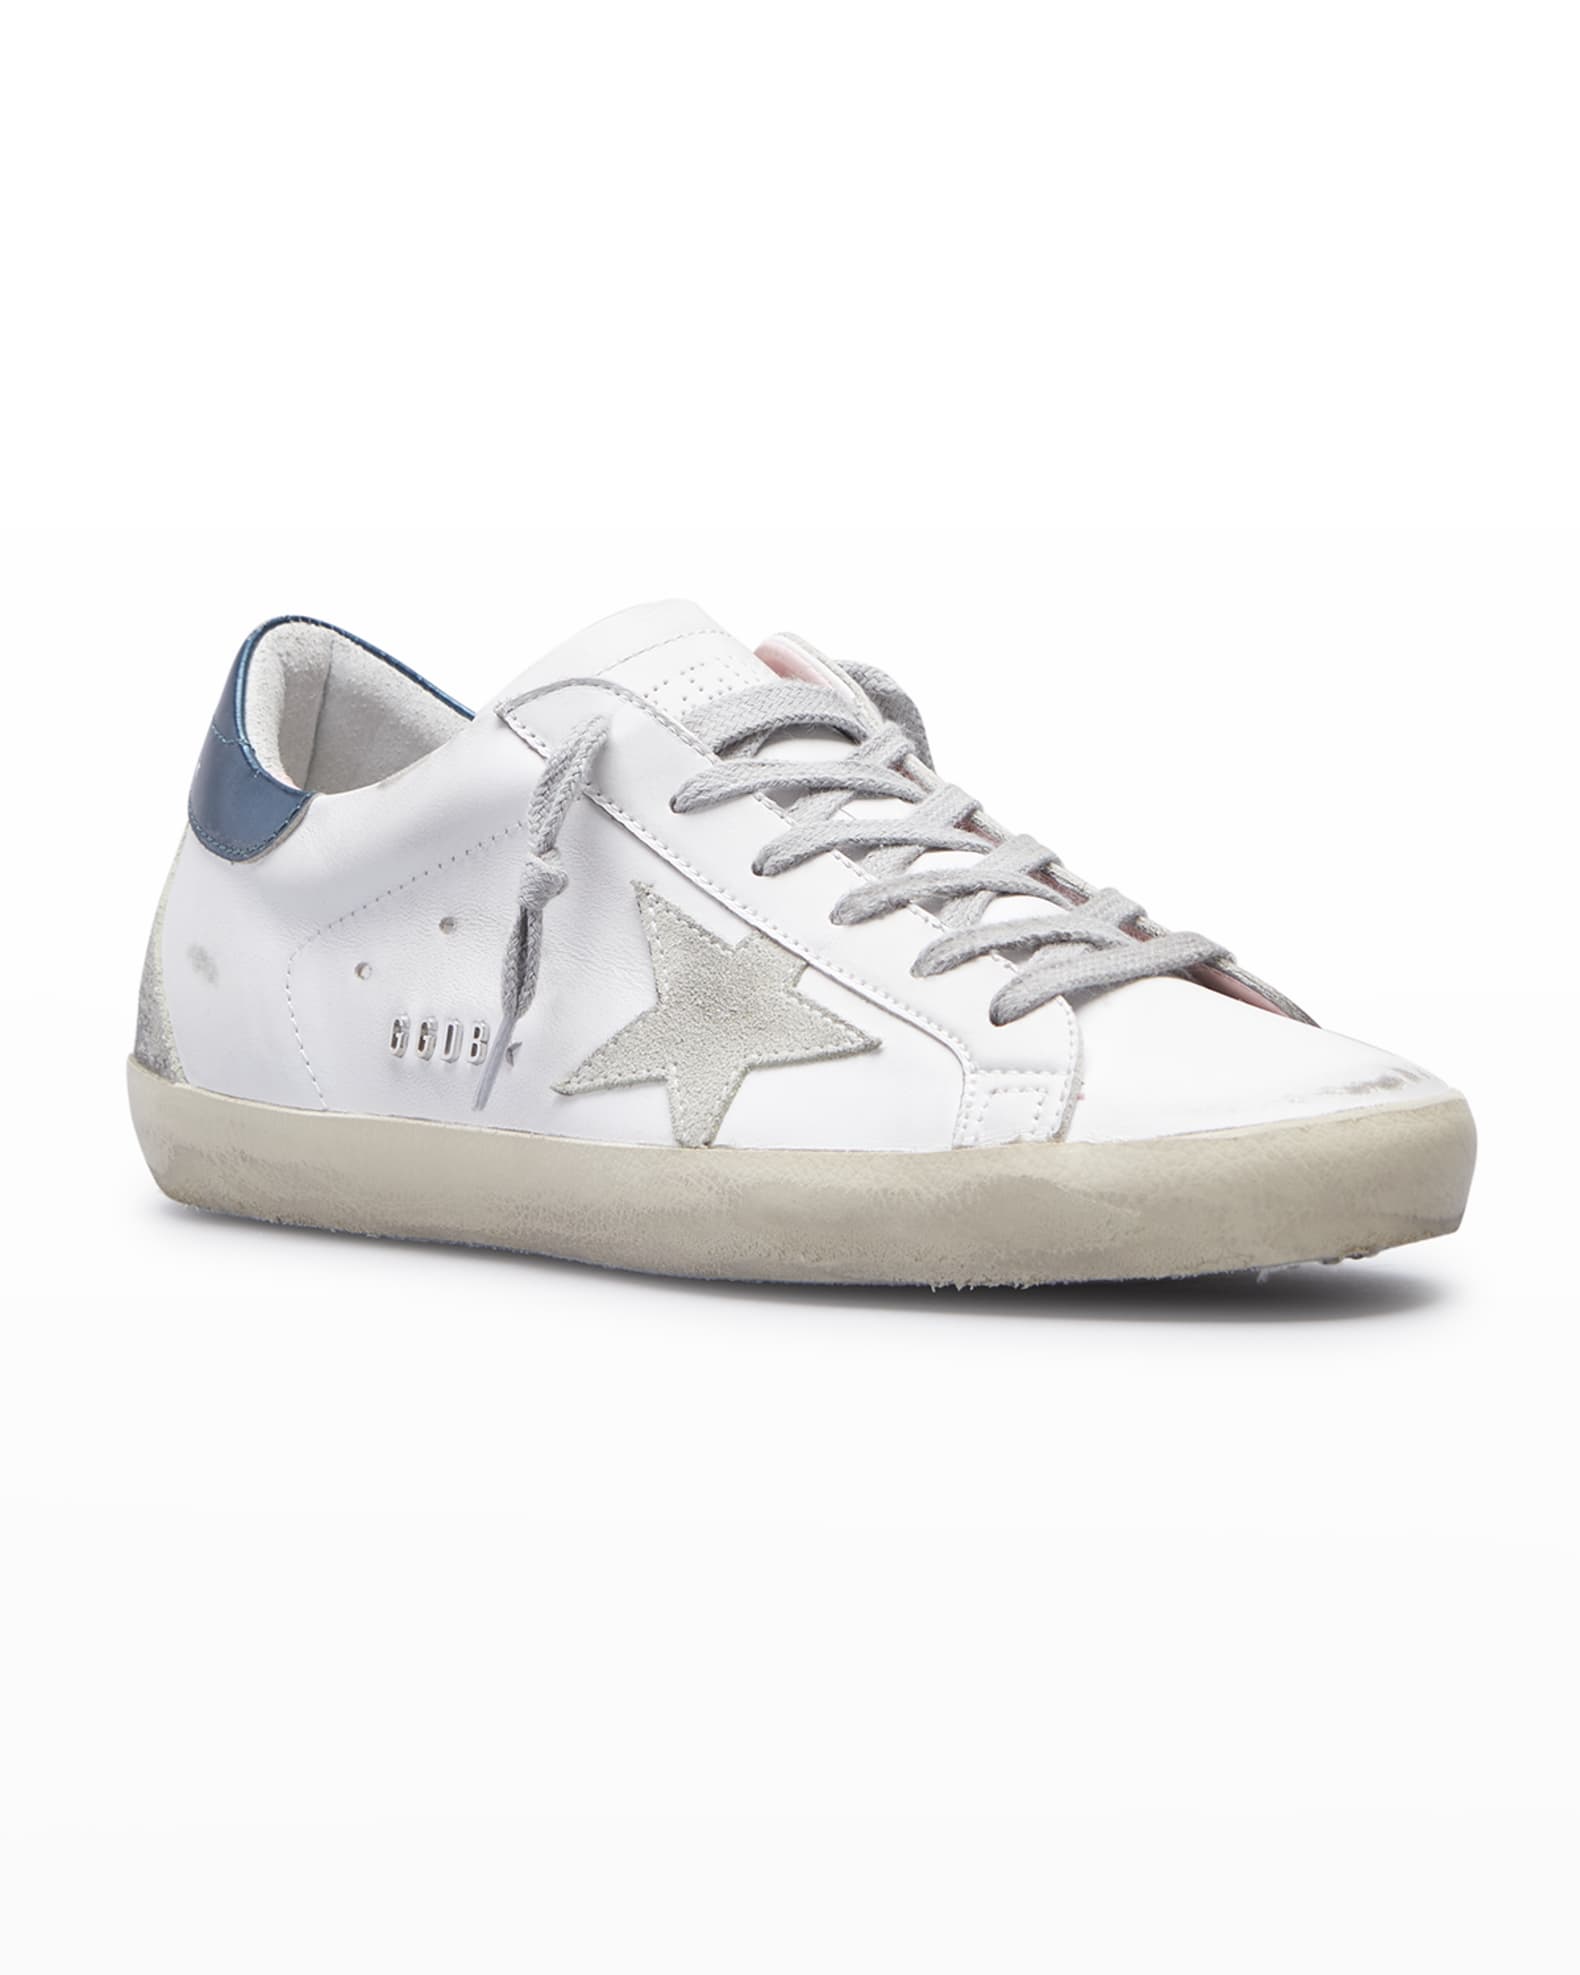 Golden Goose Super-Star Leather Sneakers with Suede Star Laminated Heel ...